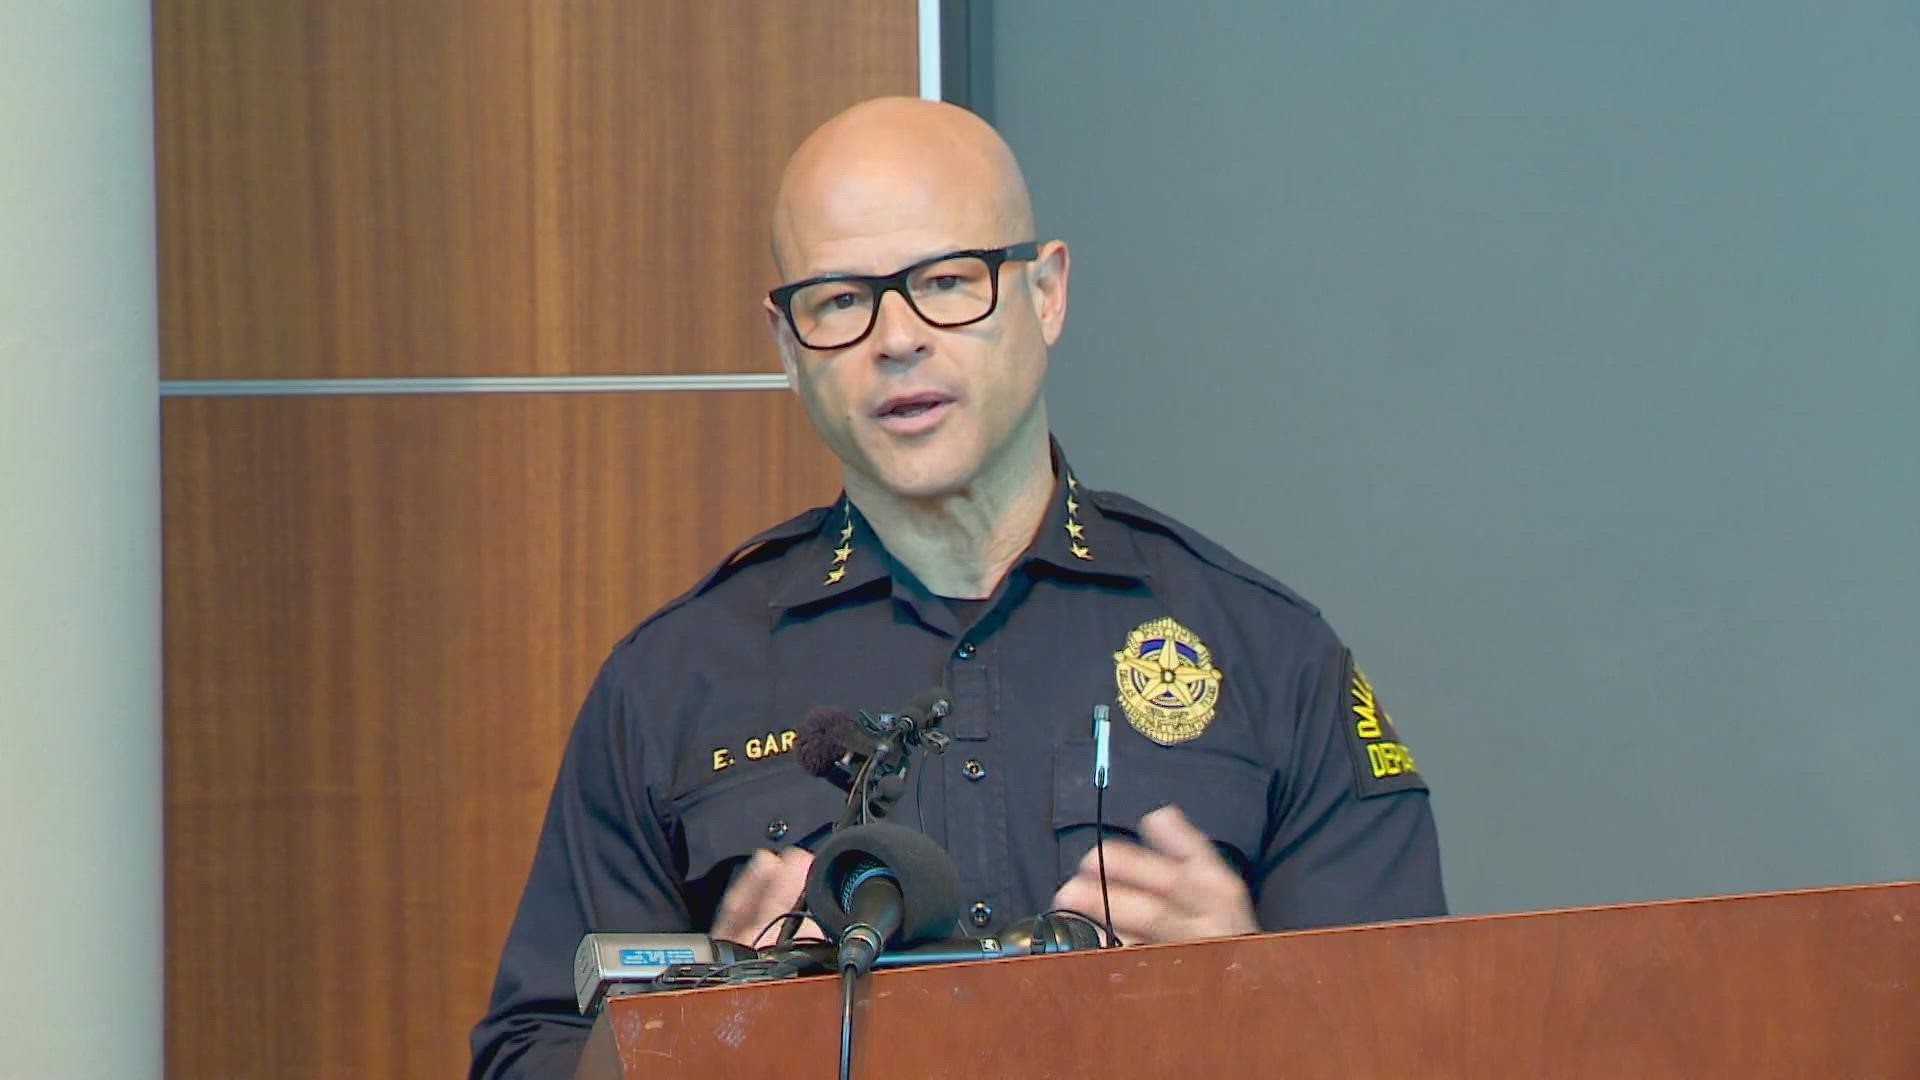 Six off-duty Dallas PD officers and a sergeant worked as security for the event prior to the shooting, according to chief Eddie Garcia.